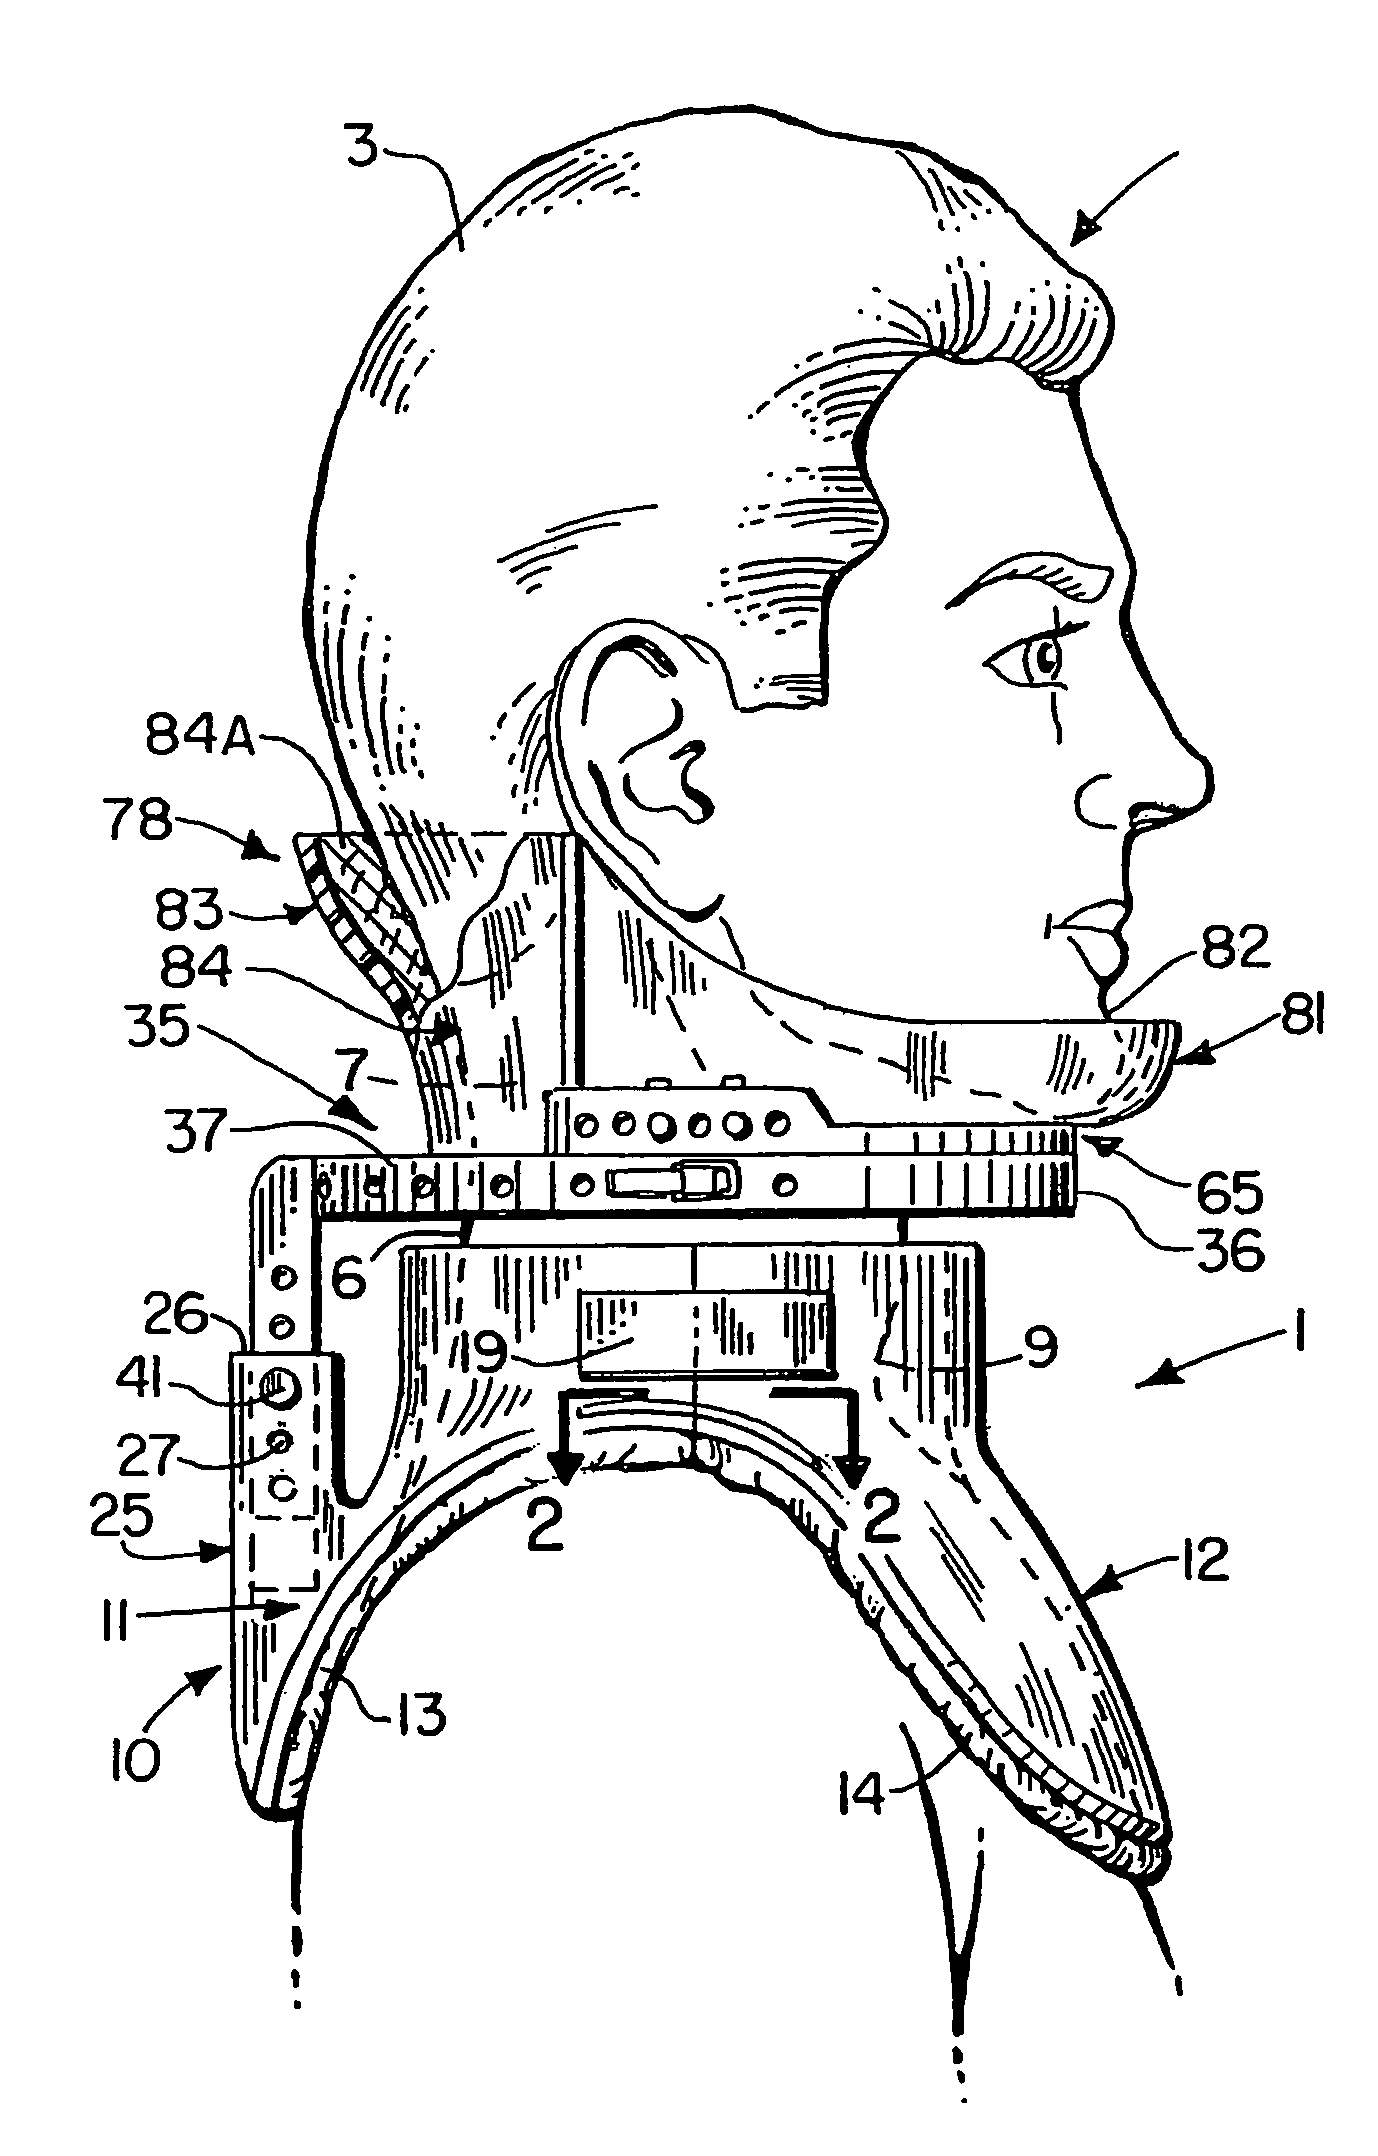 Cervical brace and therapy device